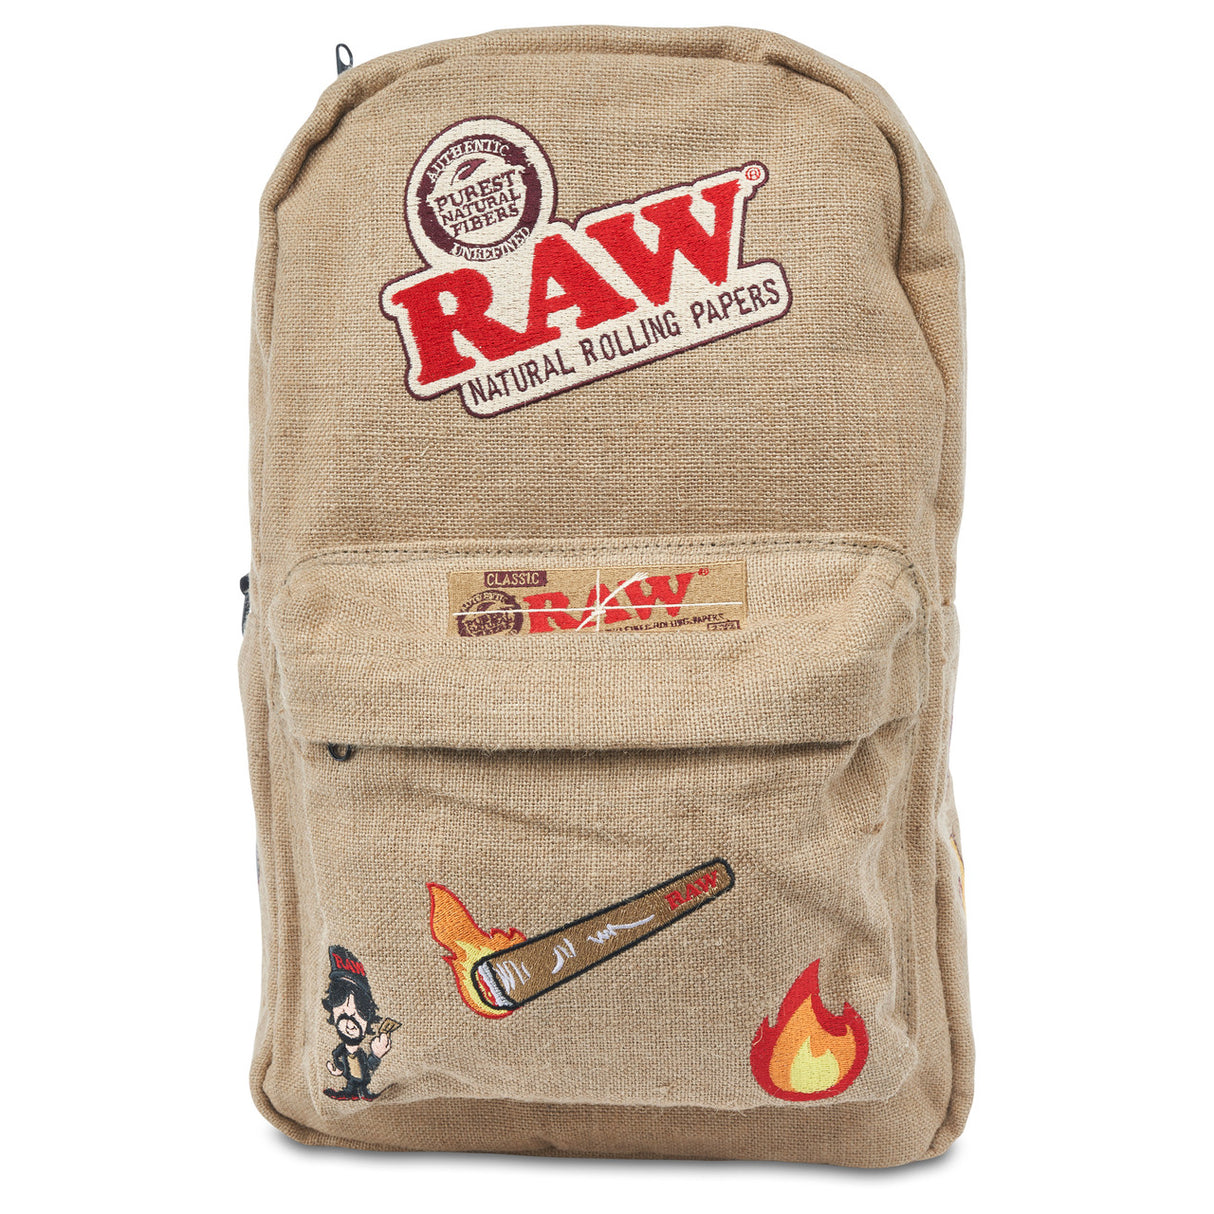 smell proof backpack from raw papers